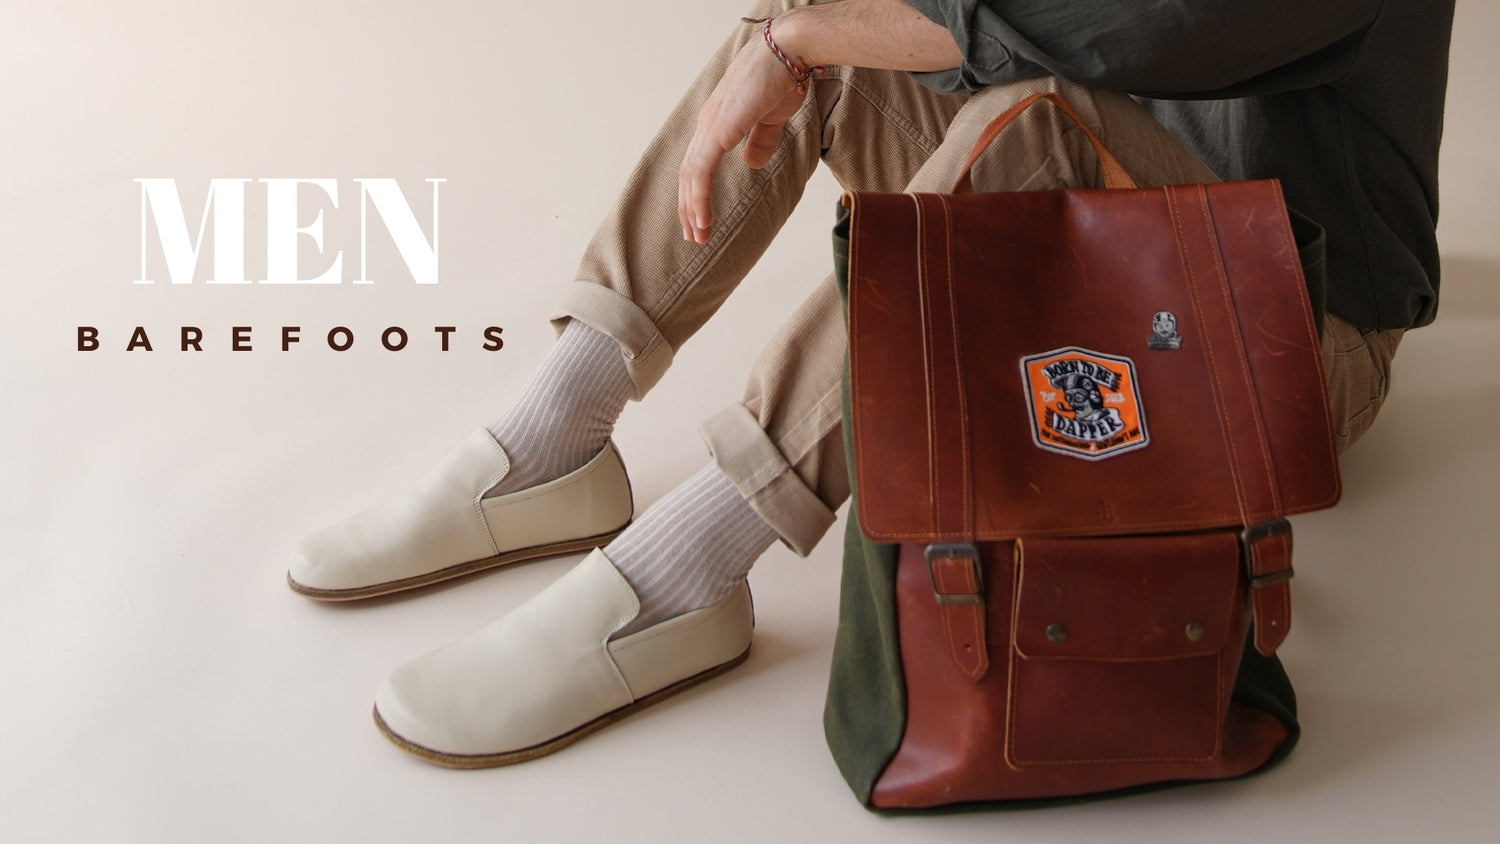 Man seated in Barefoots light slip-ons, beige cuffed pants, and brown leather bag with patches. Text 'Men Barefoots' in bold white font.